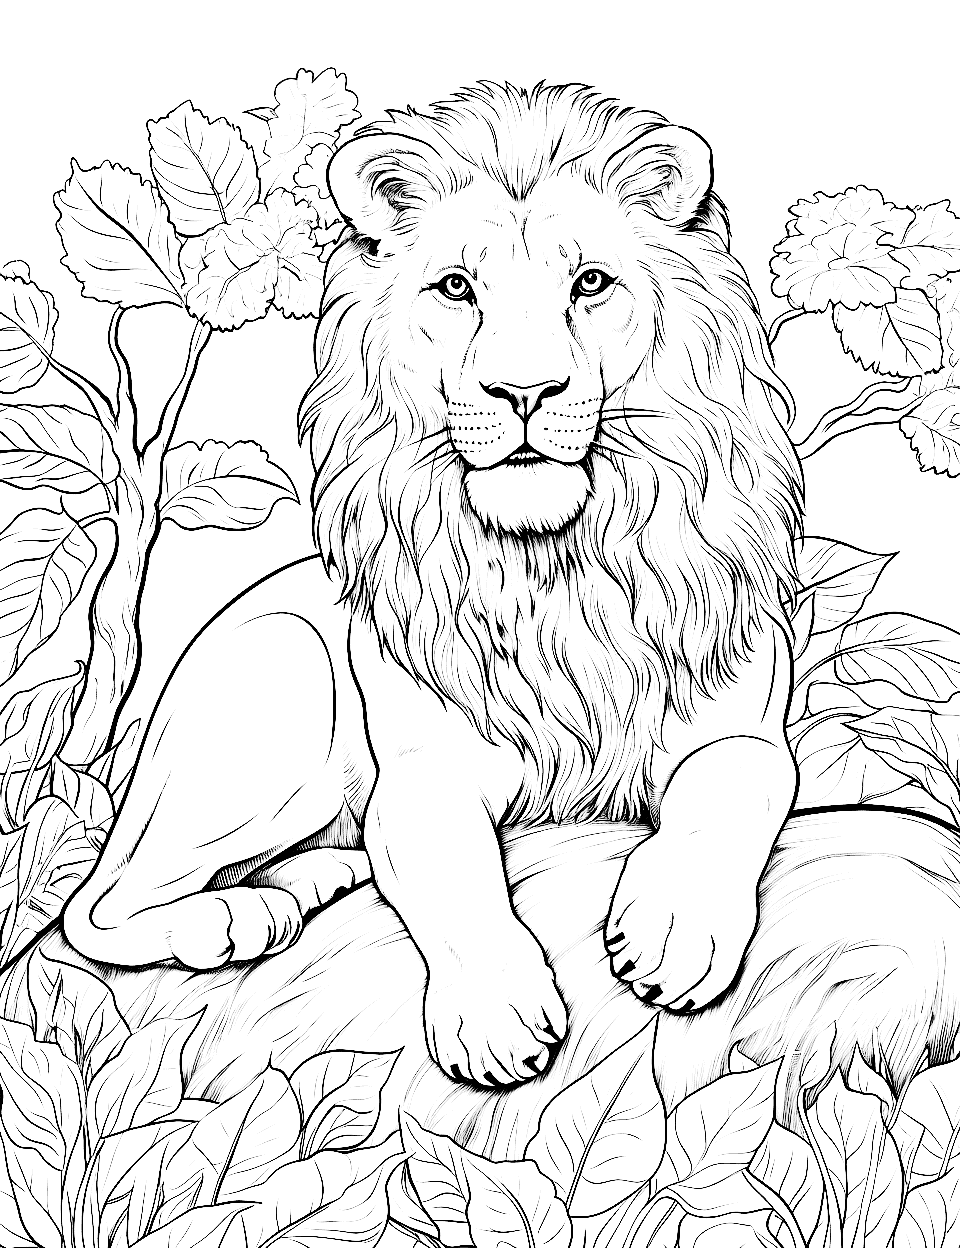 Lion's Serene Domain Adult Coloring Page - A lion lounging on a rock.